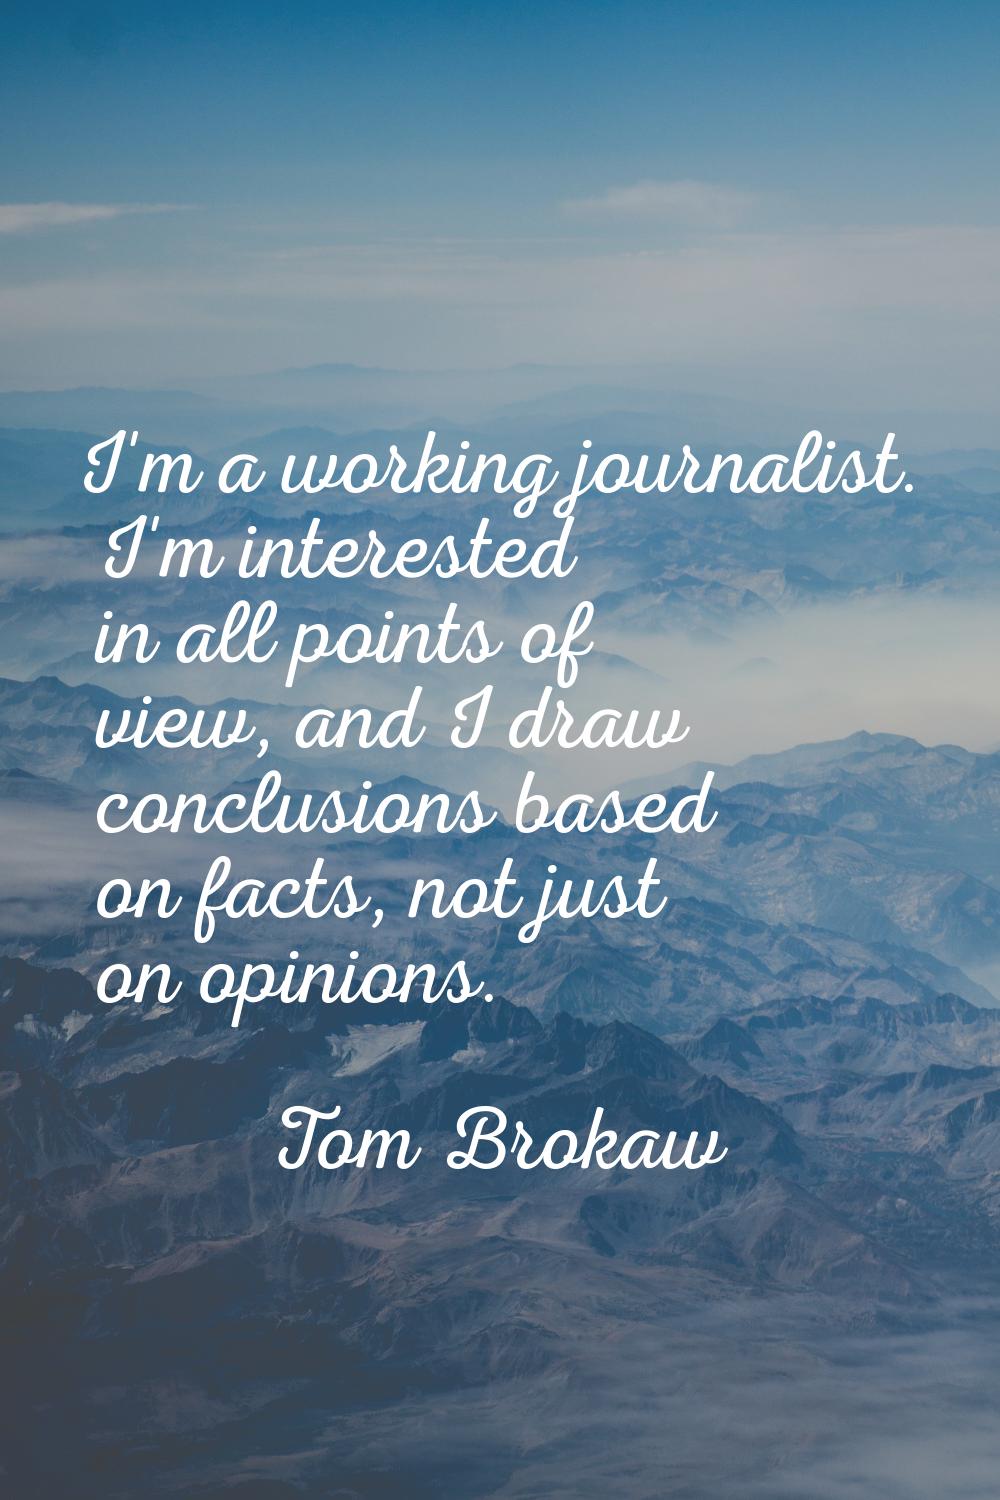 I'm a working journalist. I'm interested in all points of view, and I draw conclusions based on fac